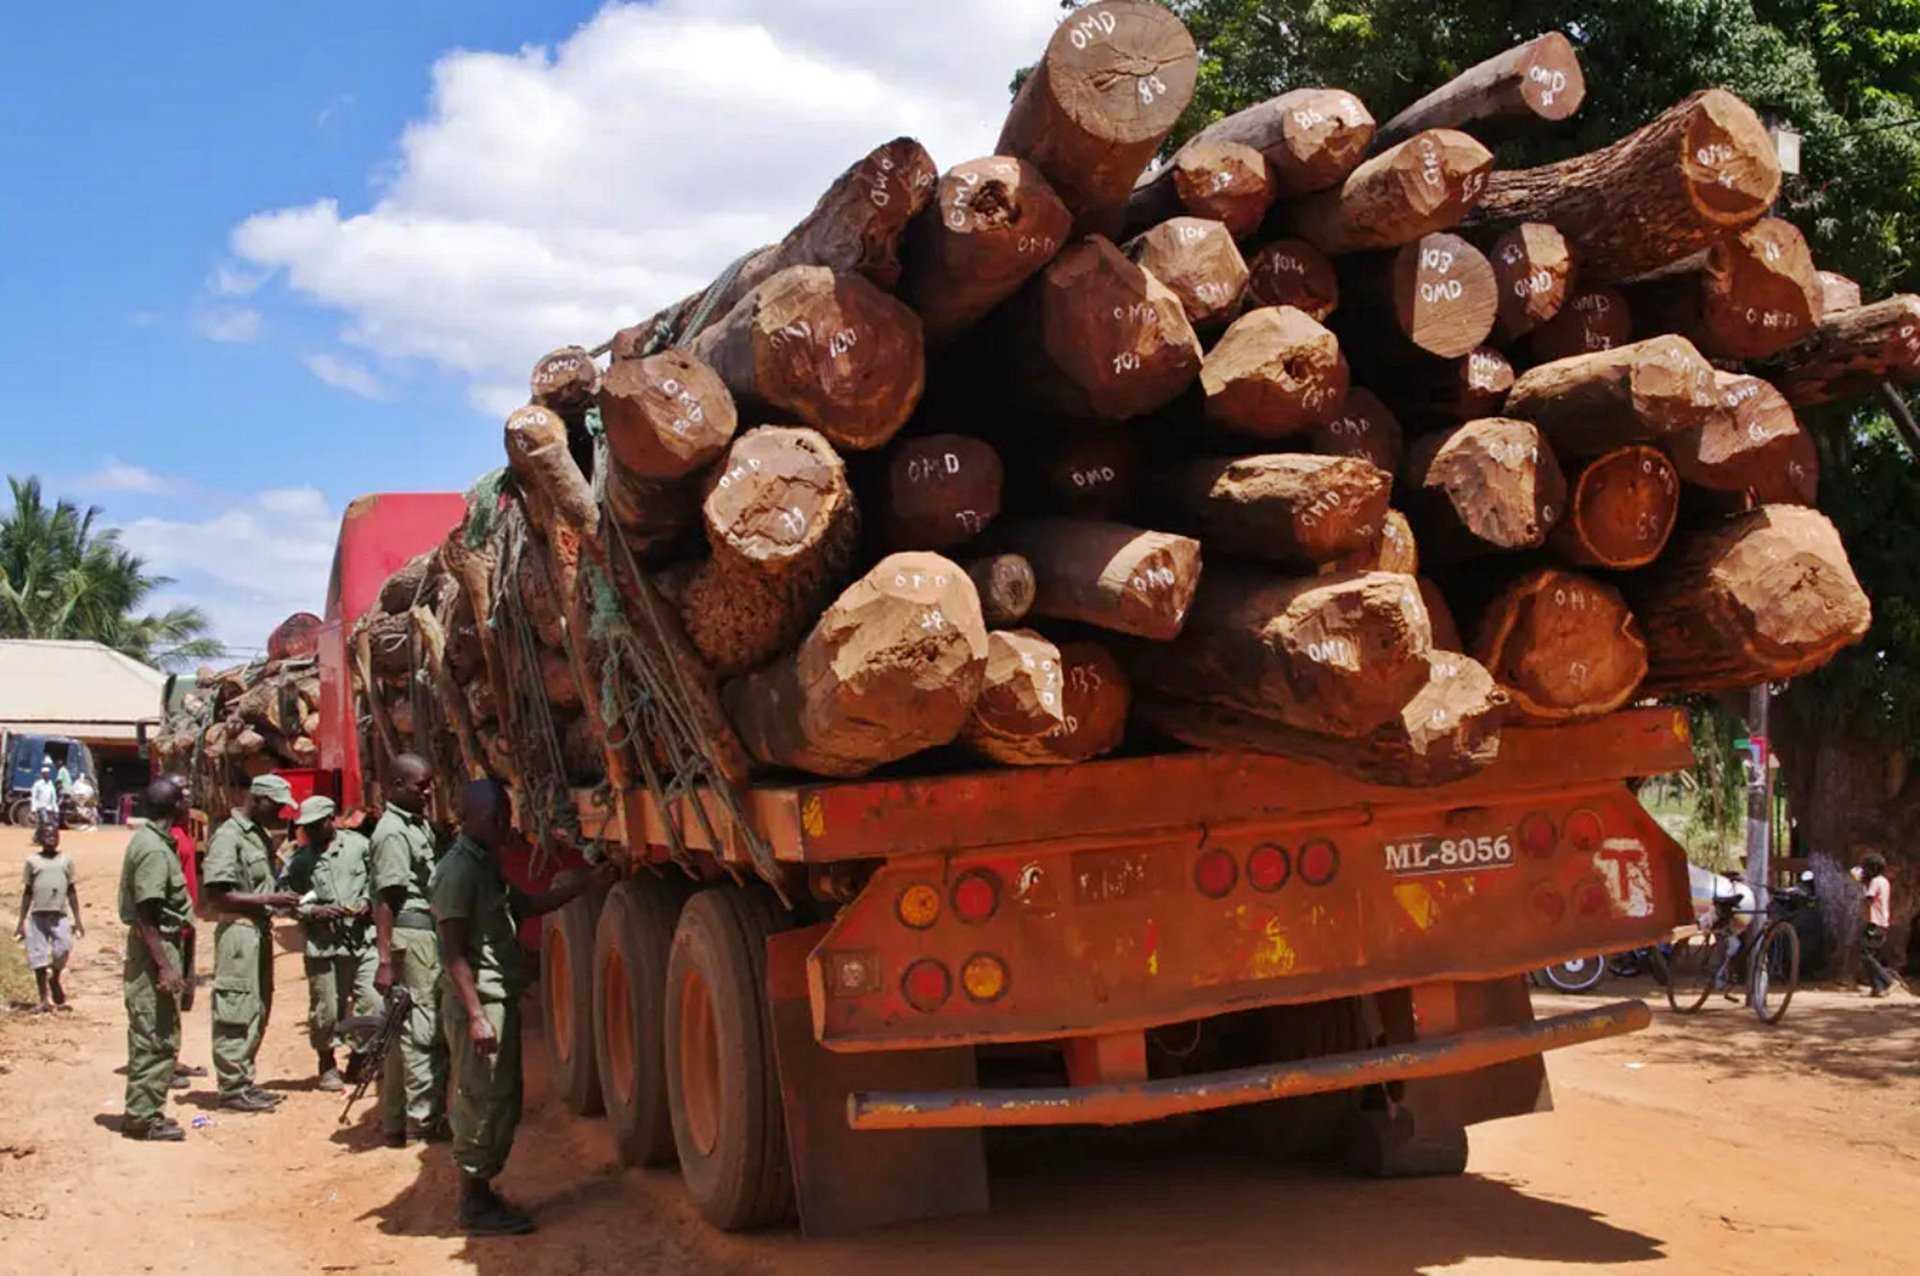 Timber Smuggling Funds Insurgency and Criminal Networks in Mozambique